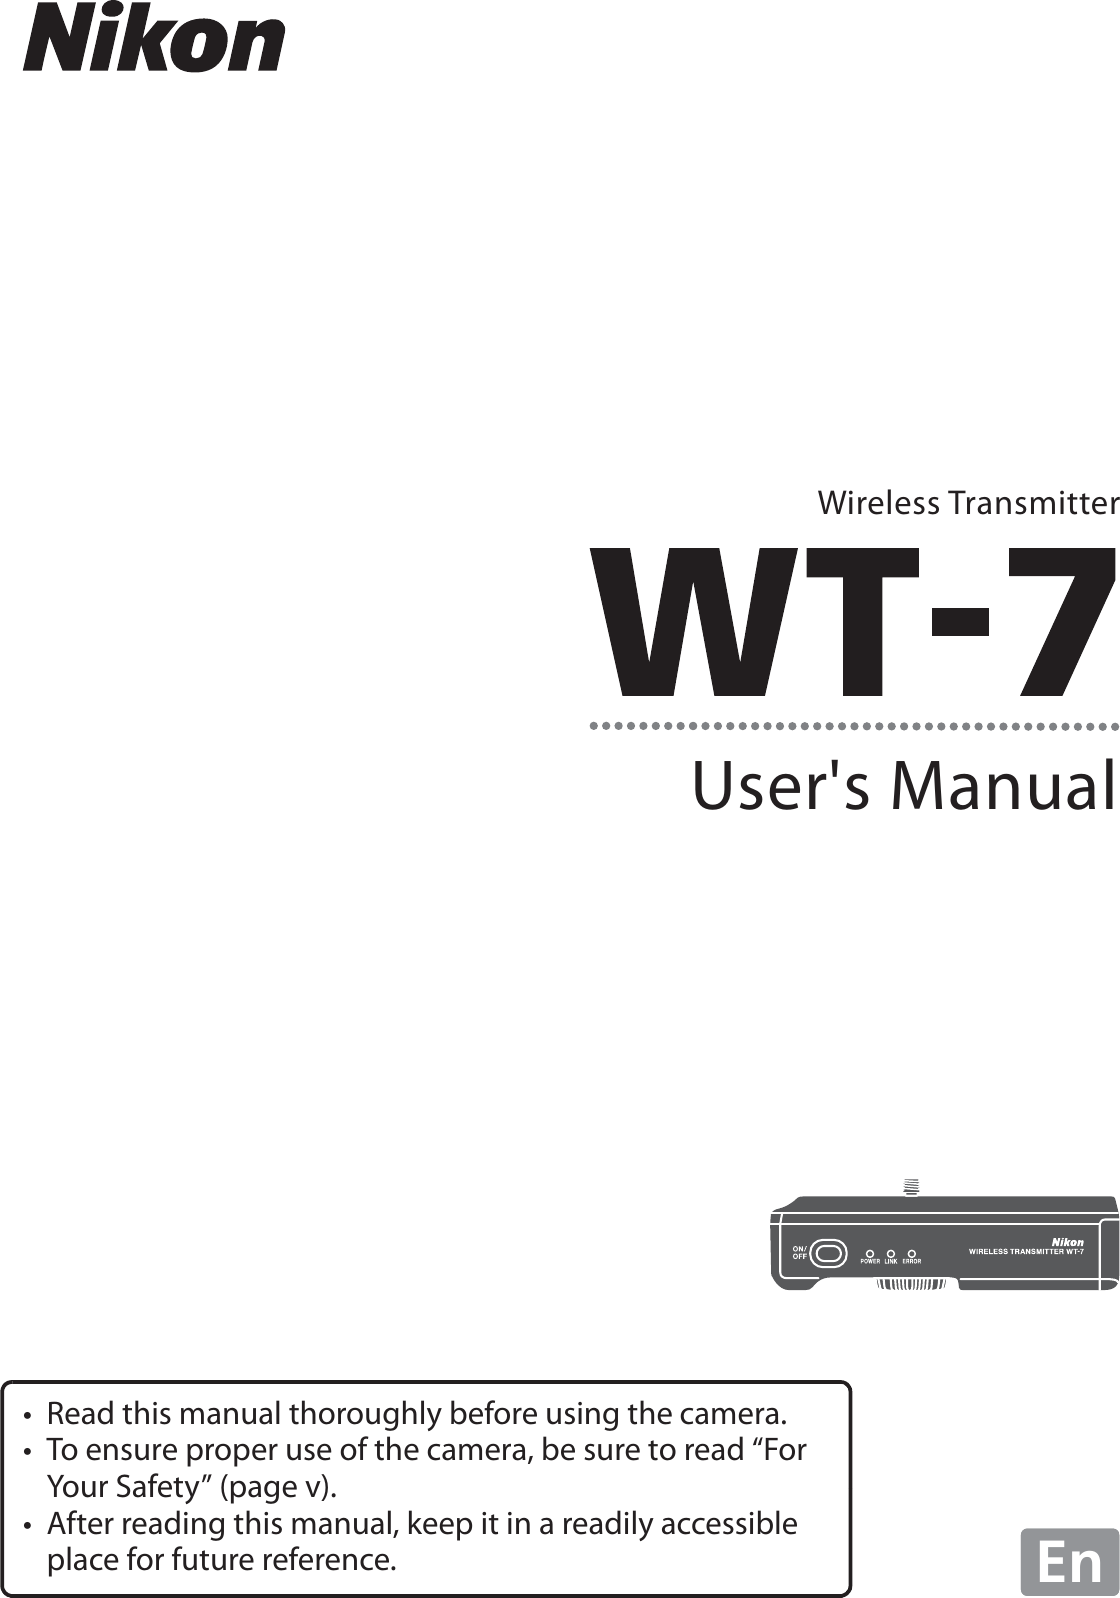 User&apos;s ManualWireless TransmitterEn• Read this manual thoroughly before using the camera.• To ensure proper use of the camera, be sure to read “For Your Safety” (page v).• After reading this manual, keep it in a readily accessible place for future reference.